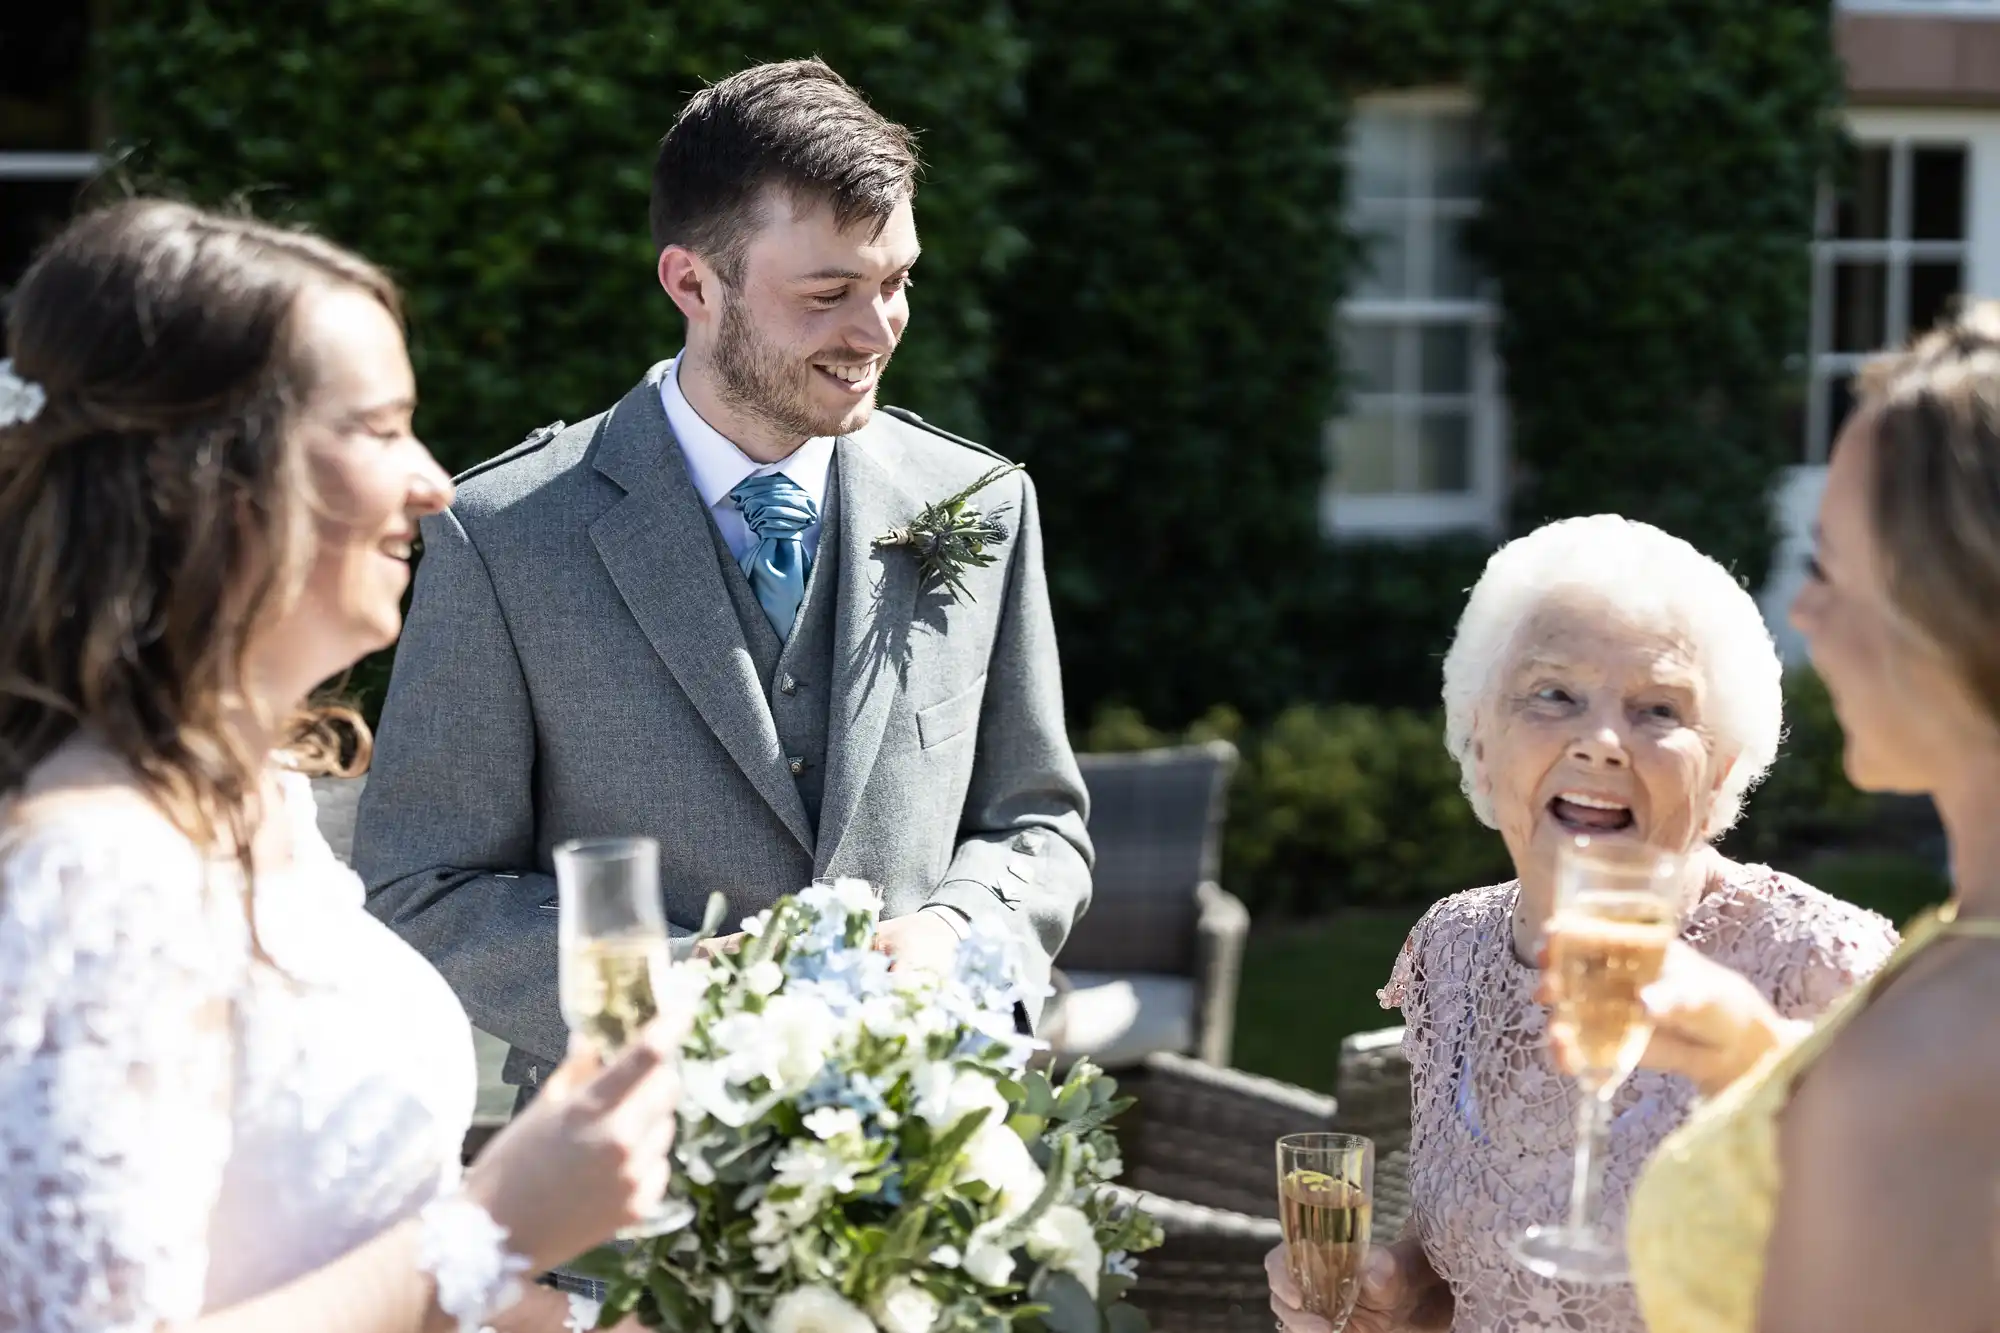 A groom smiling and chatting with three women during a sunny outdoor wedding reception, with champagne glasses in hand.